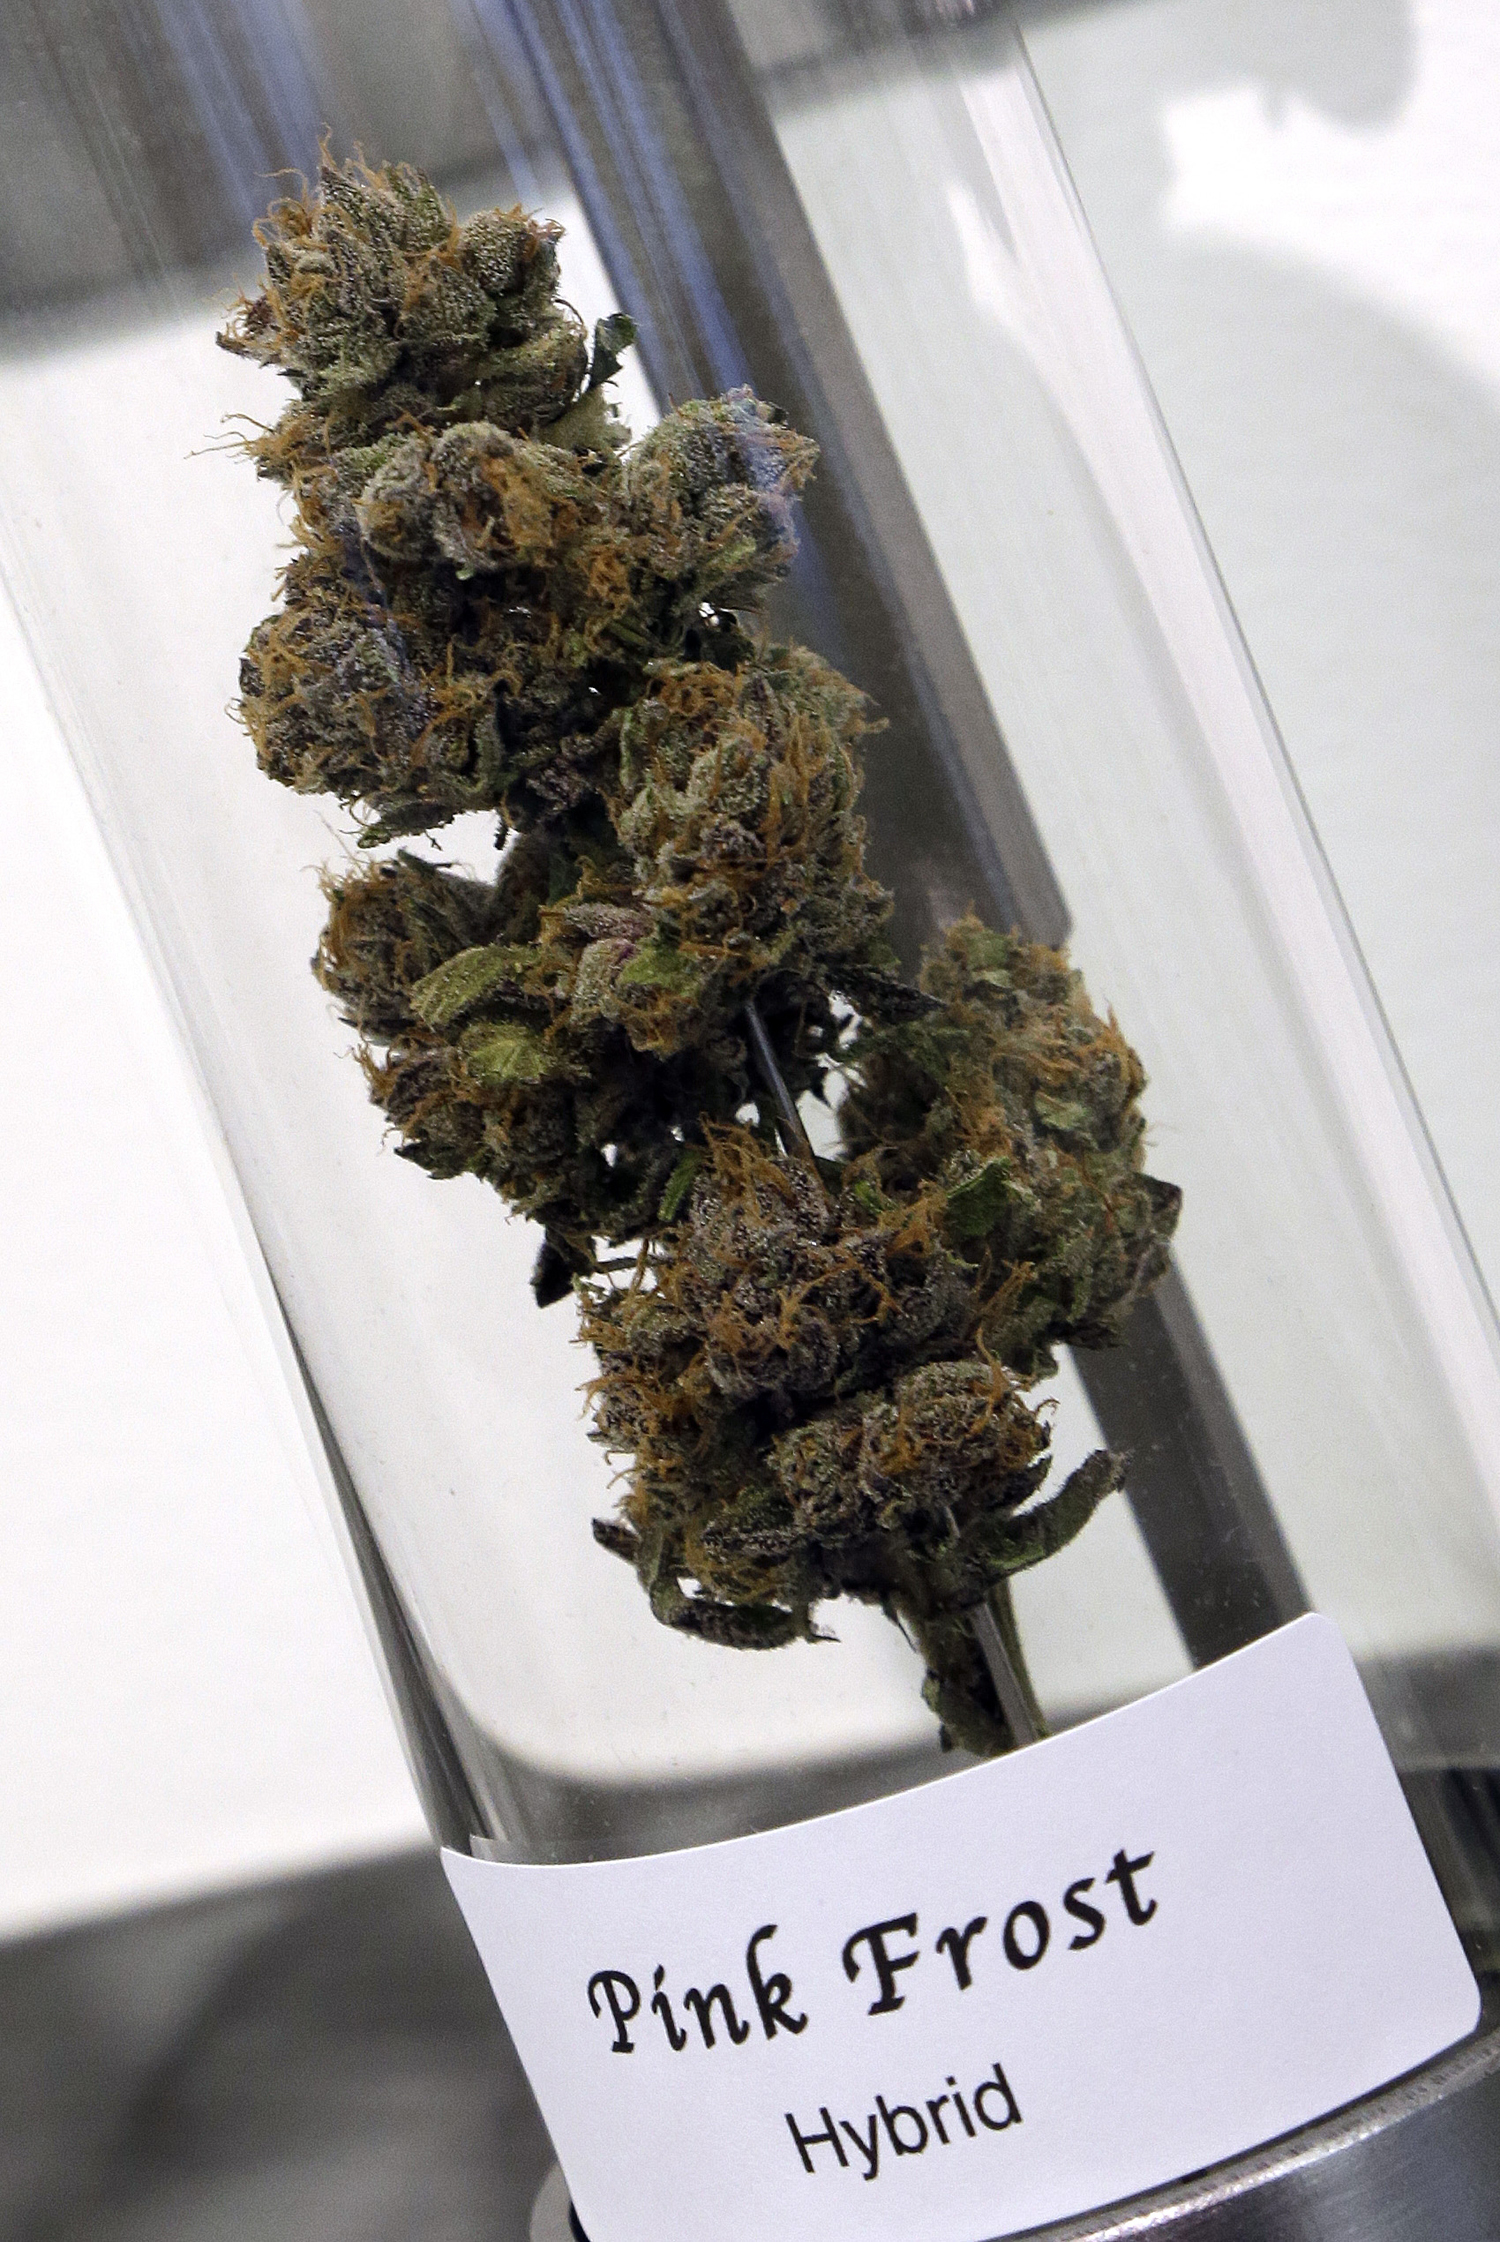 A sample of cannabis appears on display at Shango Premium Cannabis dispensary in Portland, Ore. (Don Ryan—AP)